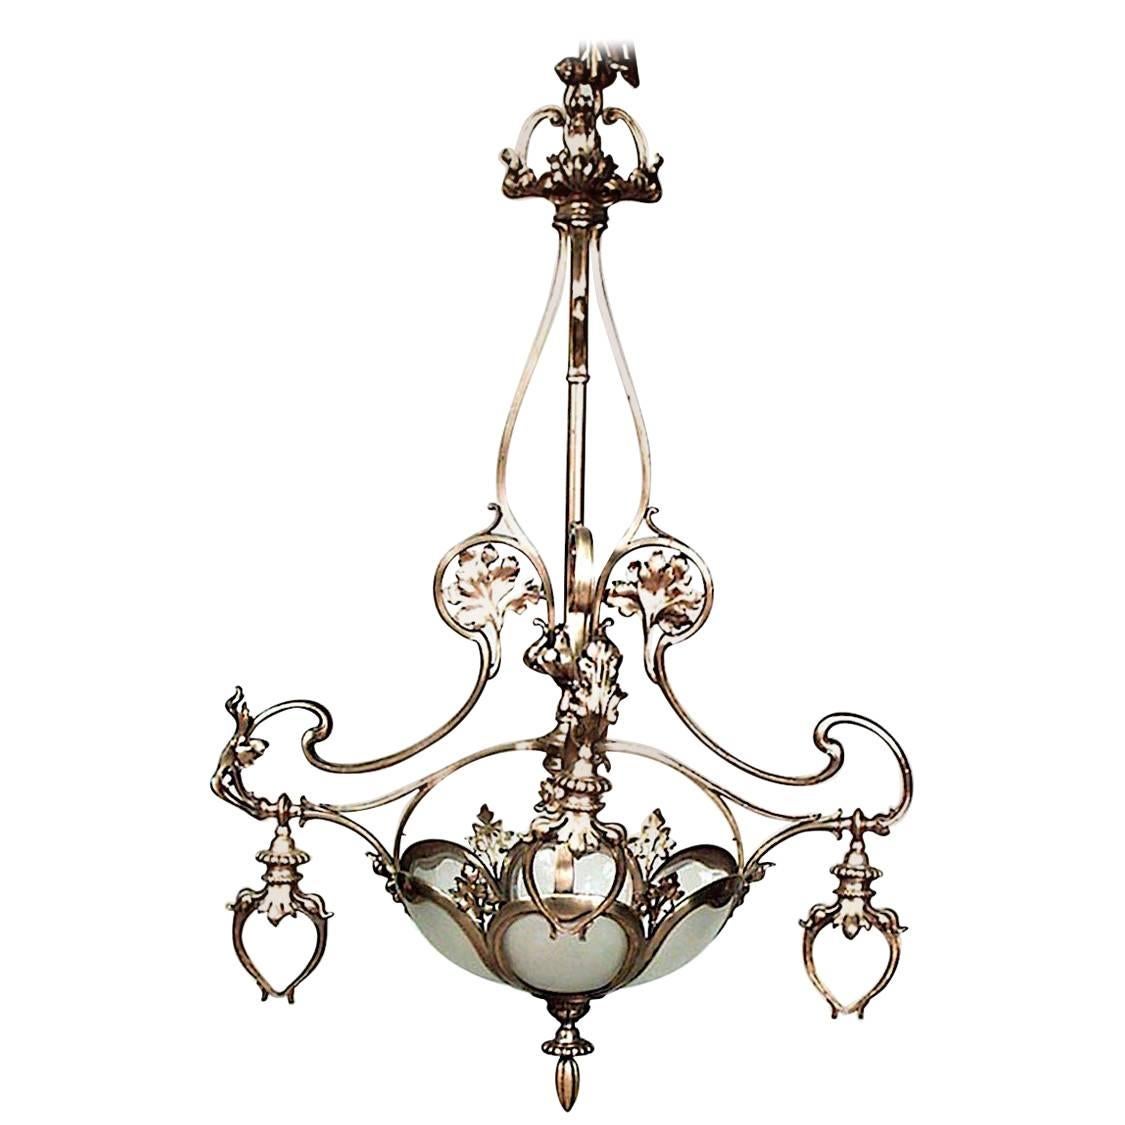 French Art Nouveau Bronze Dore and Glass Chandelier